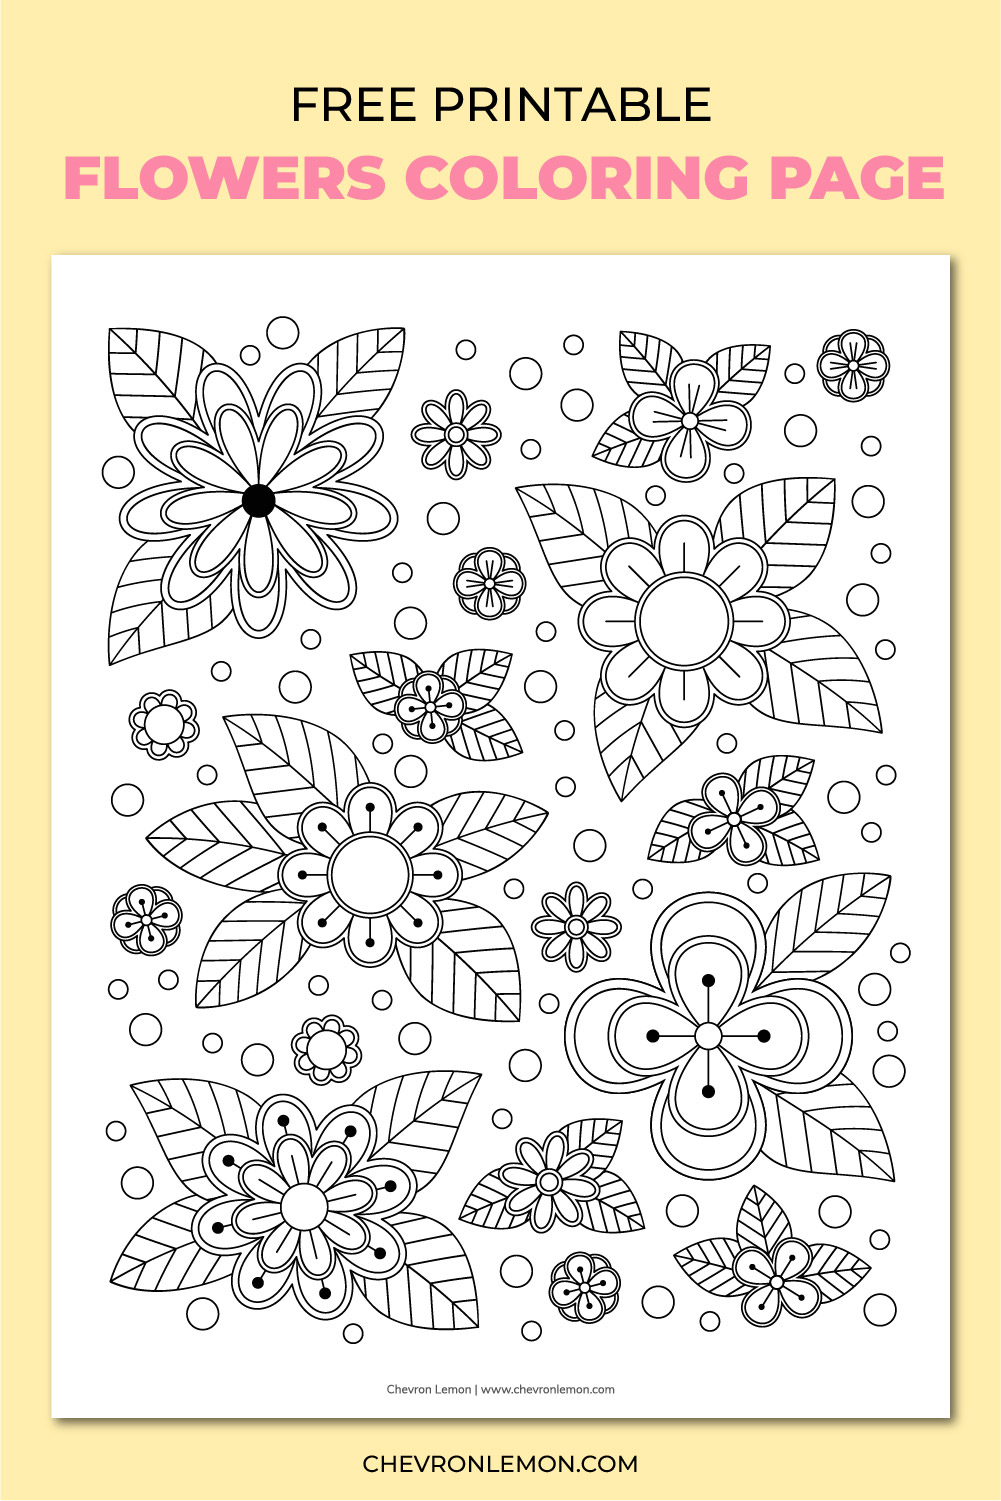 Printable flowers coloring page